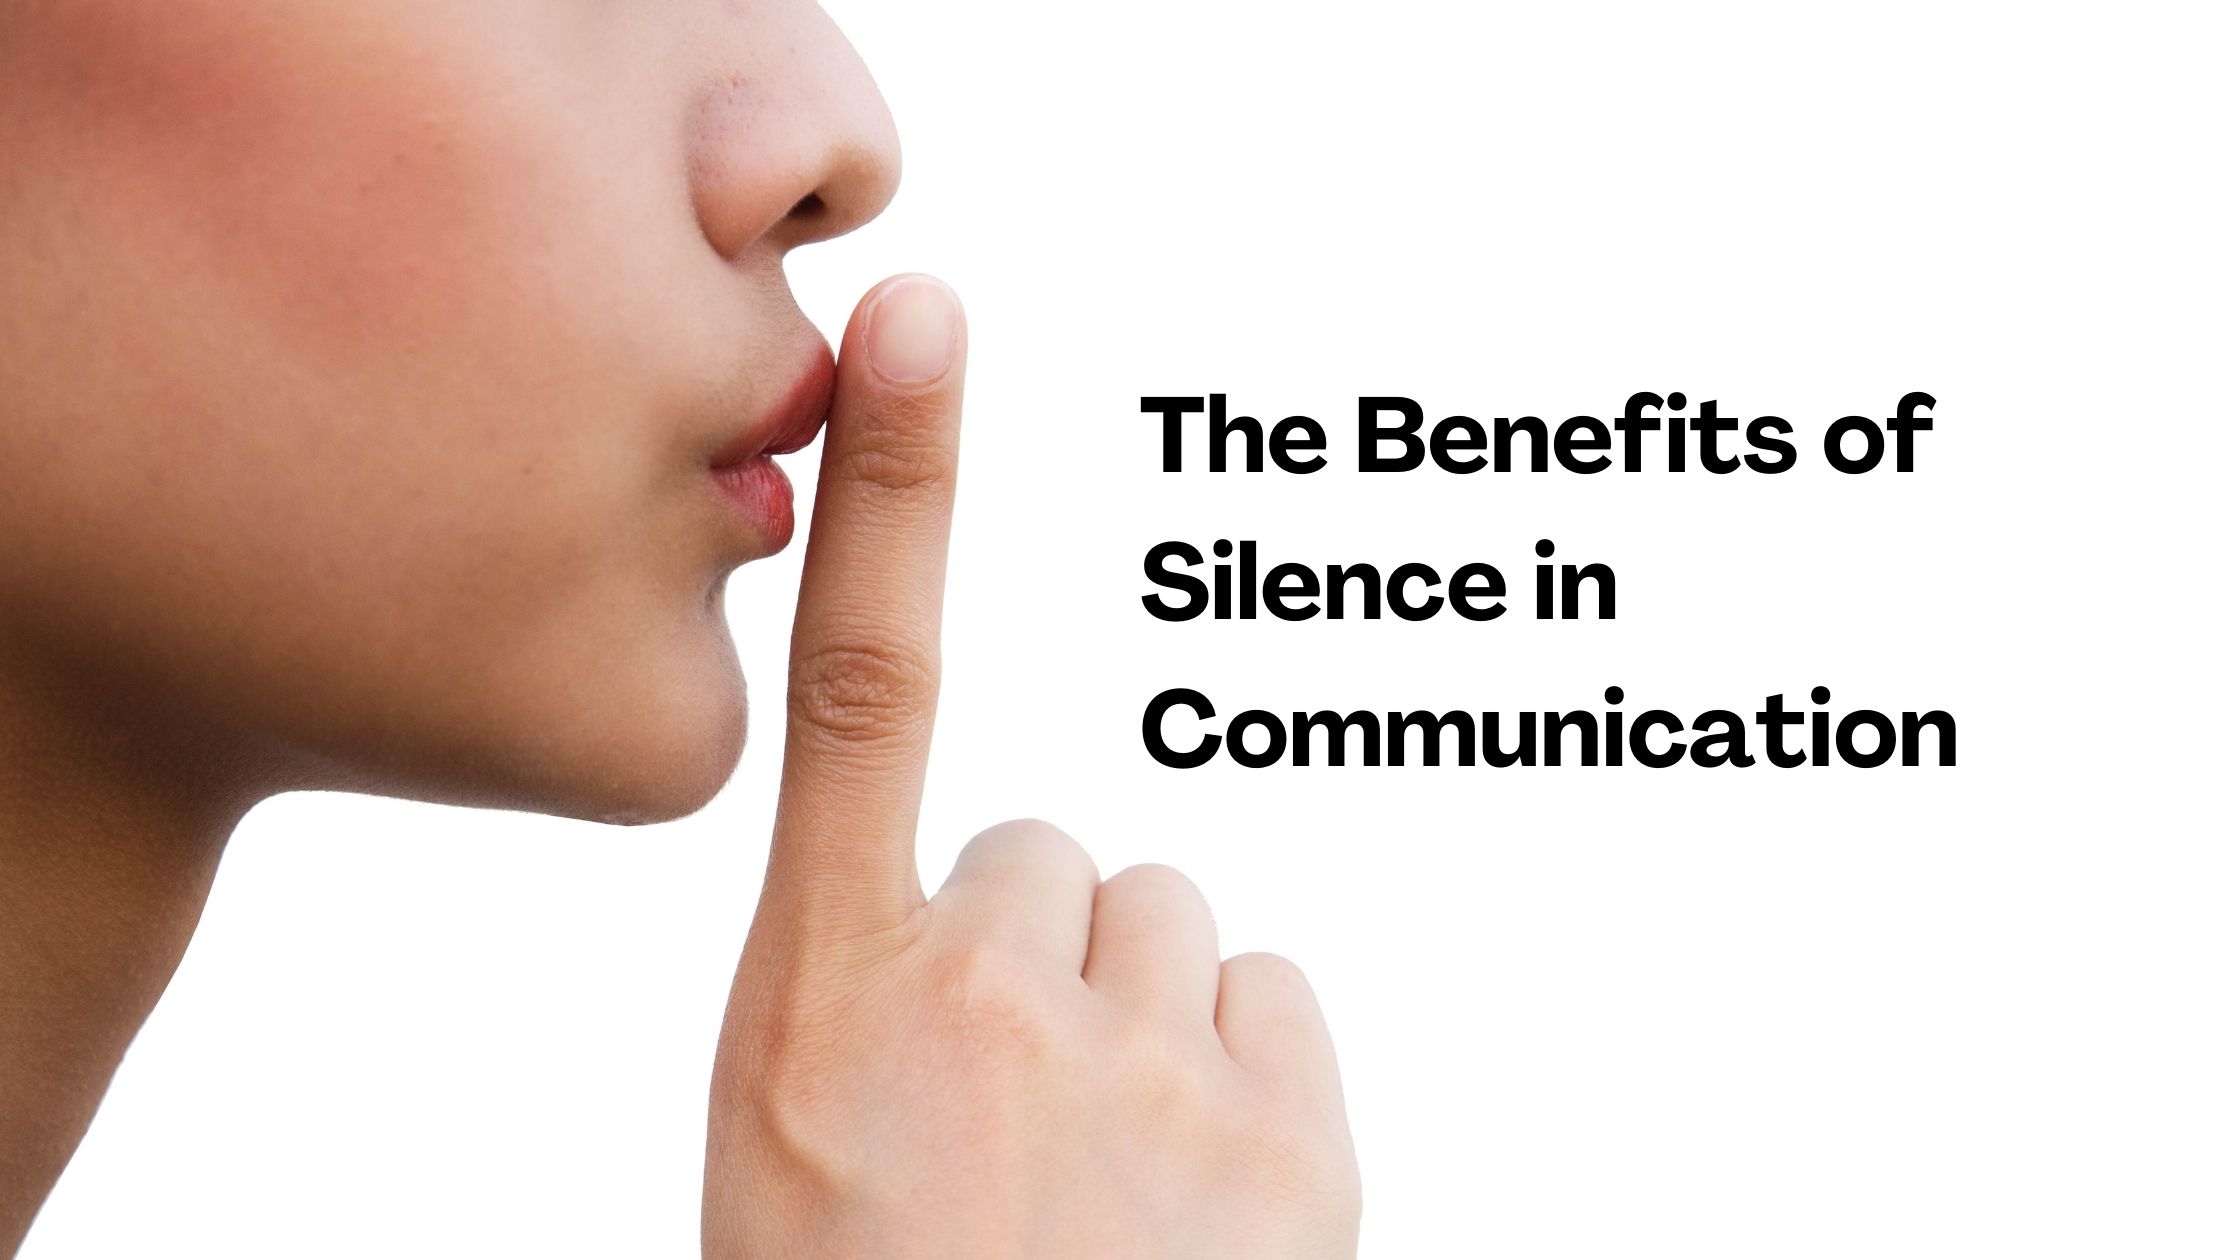 The Benefits of Silence in Communication